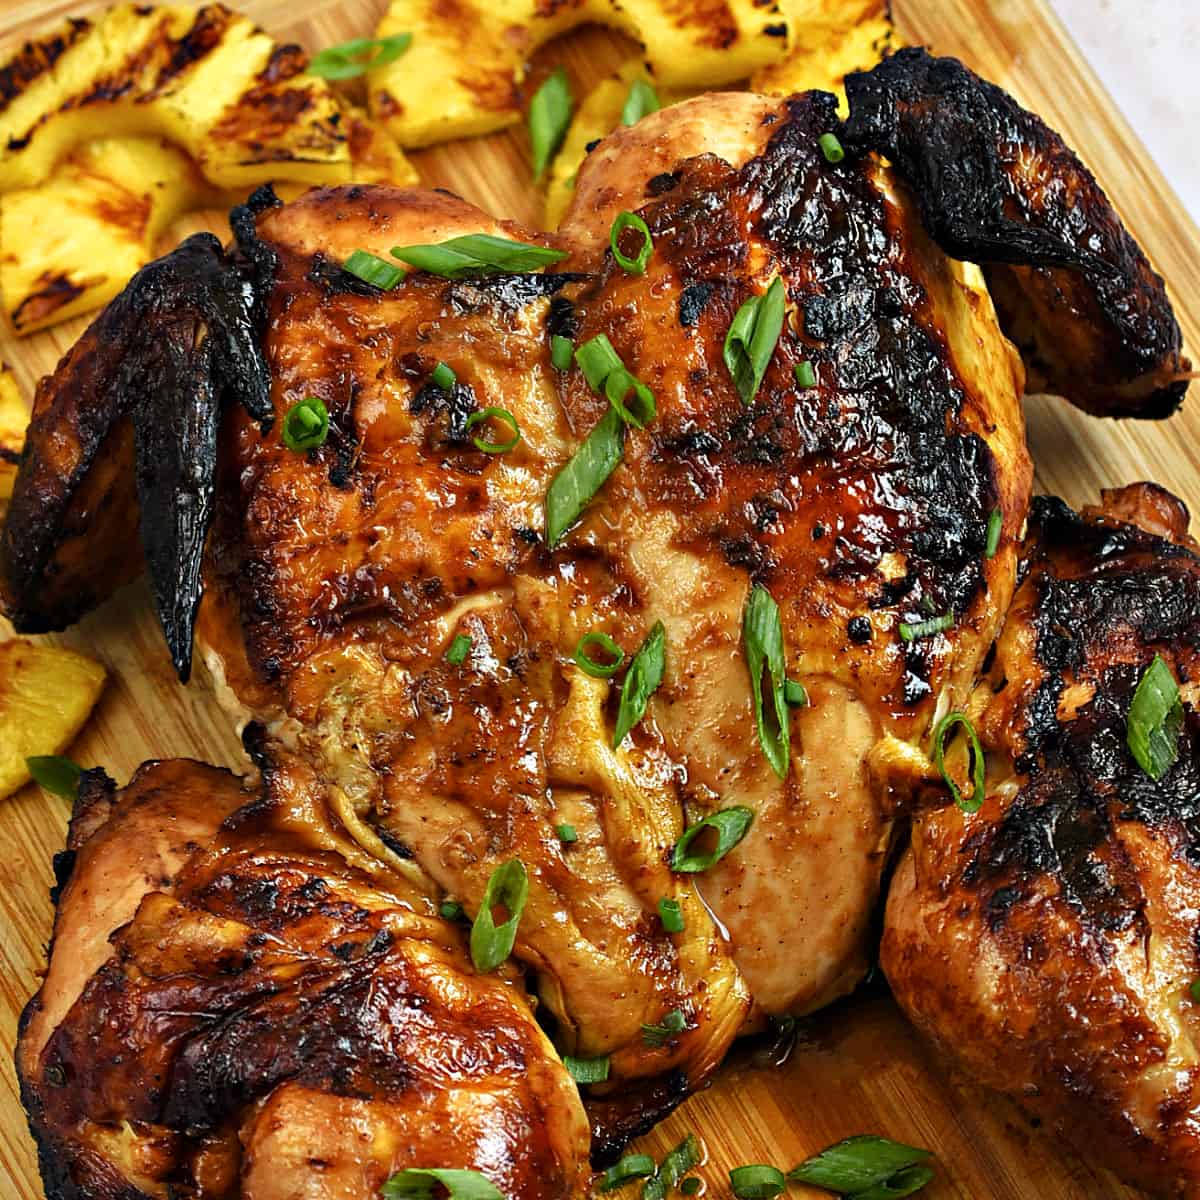 Hawaiian Grilled Chicken and Pineapple